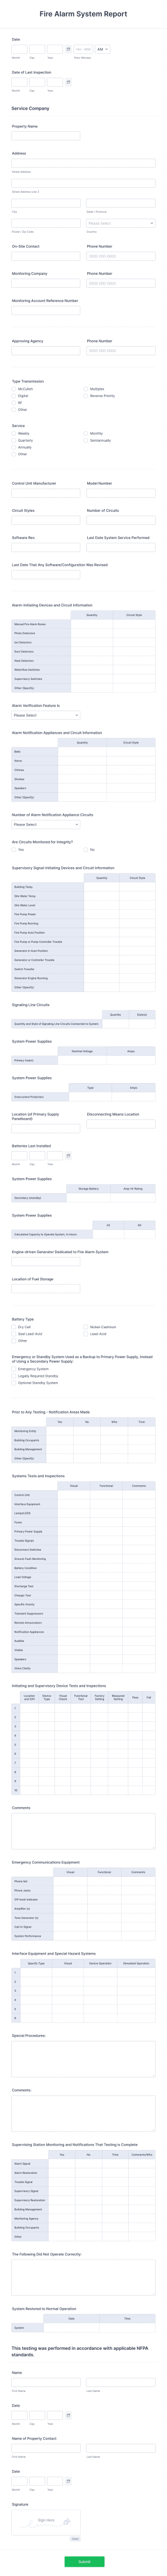 Fire Alarm Inspection Report Template Form Template